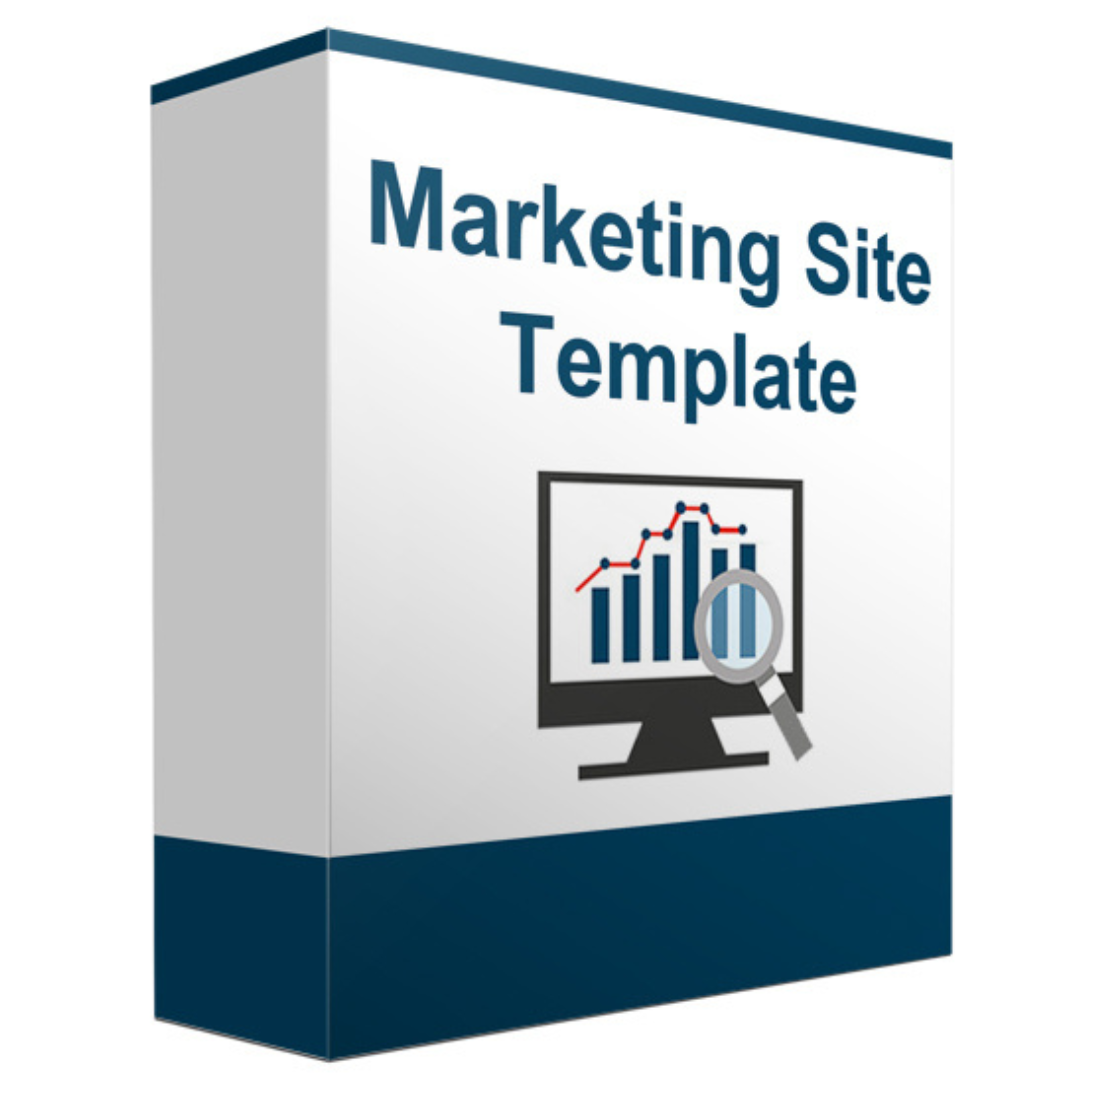 Preview marketing site template.